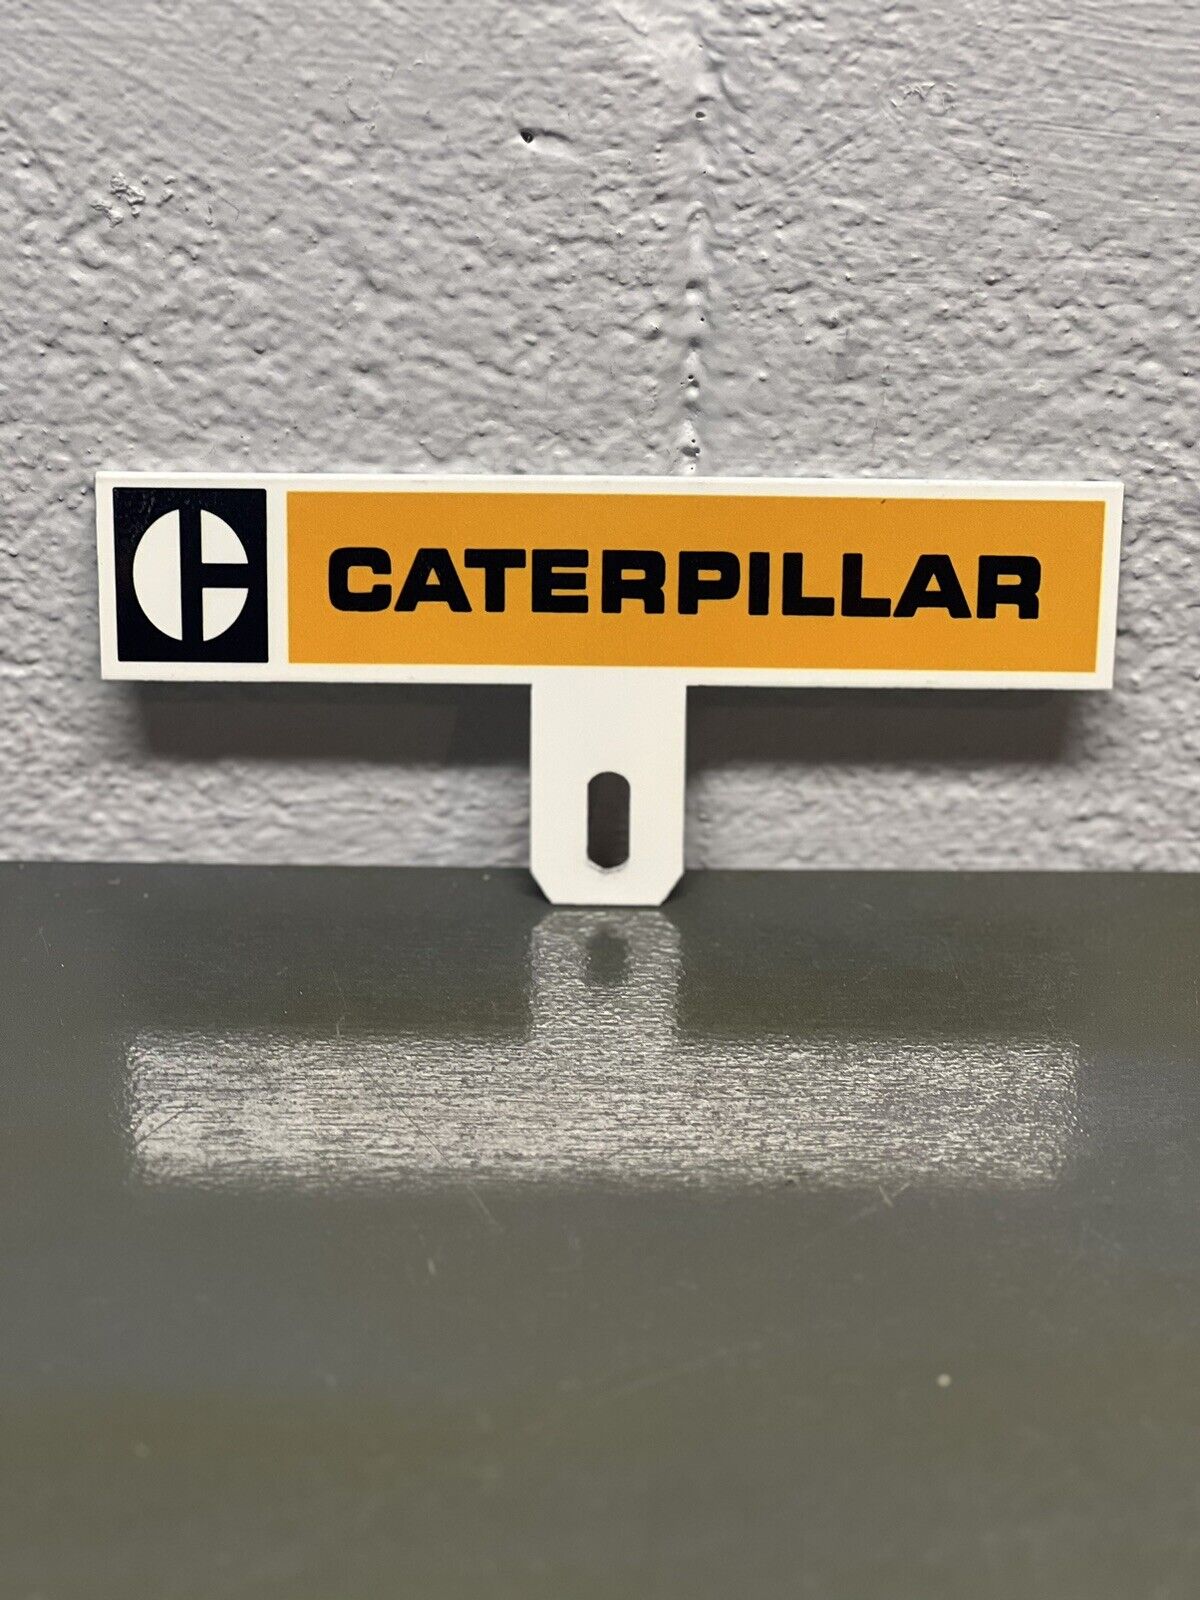 CATERPILLAR Thick Metal Plate Topper Farm Service Gas Oil Tractor Diesel Sign